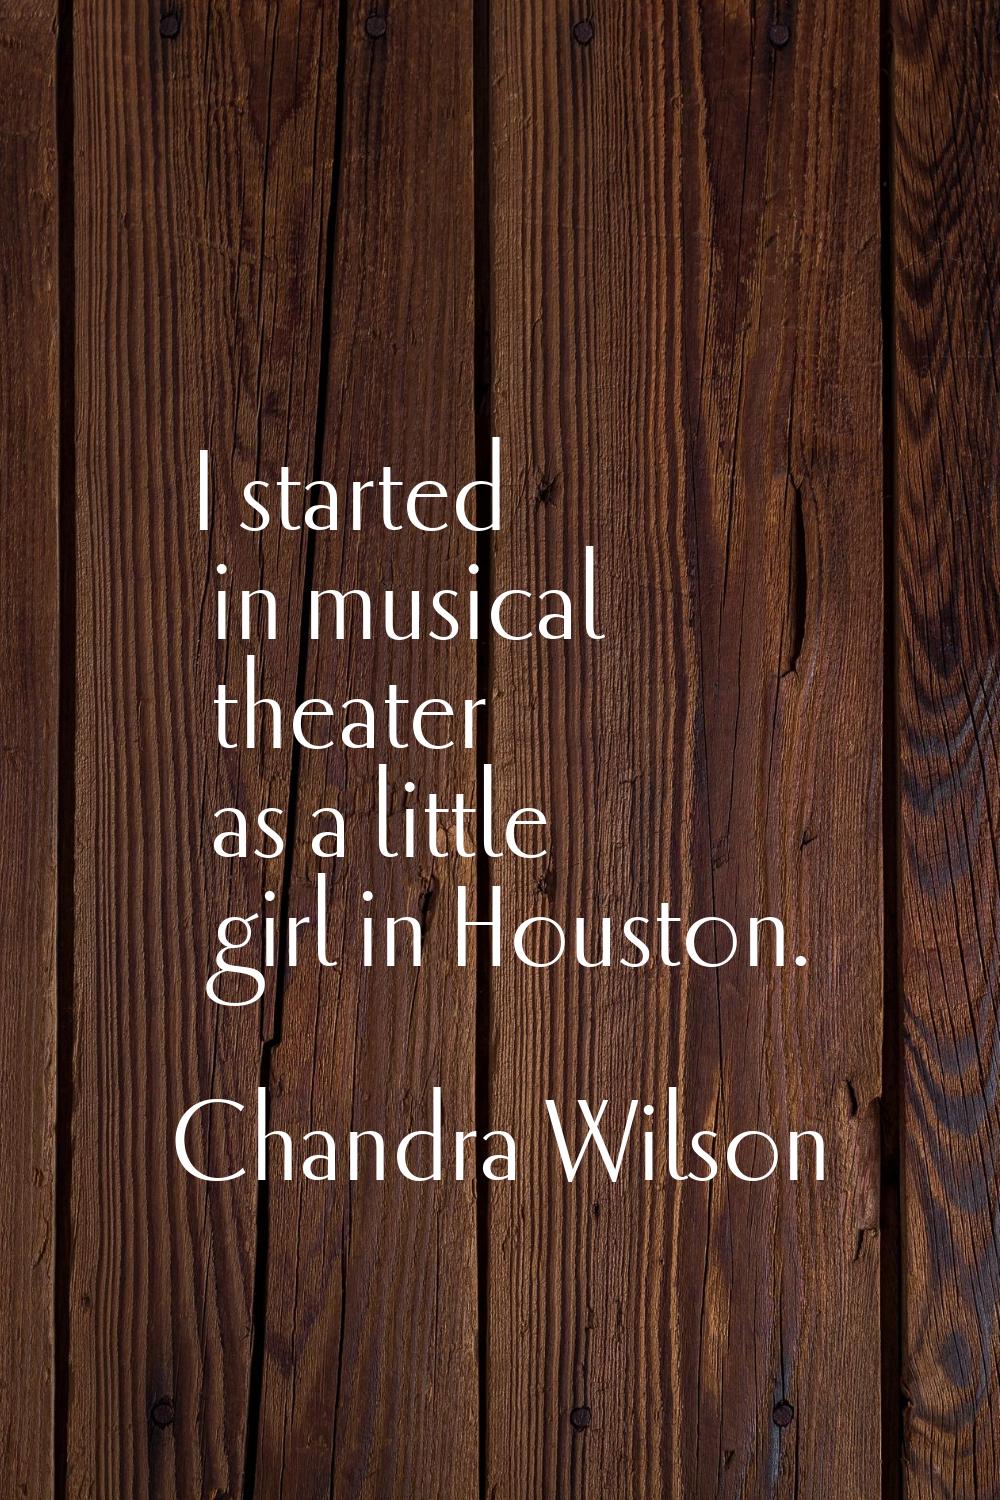 I started in musical theater as a little girl in Houston.